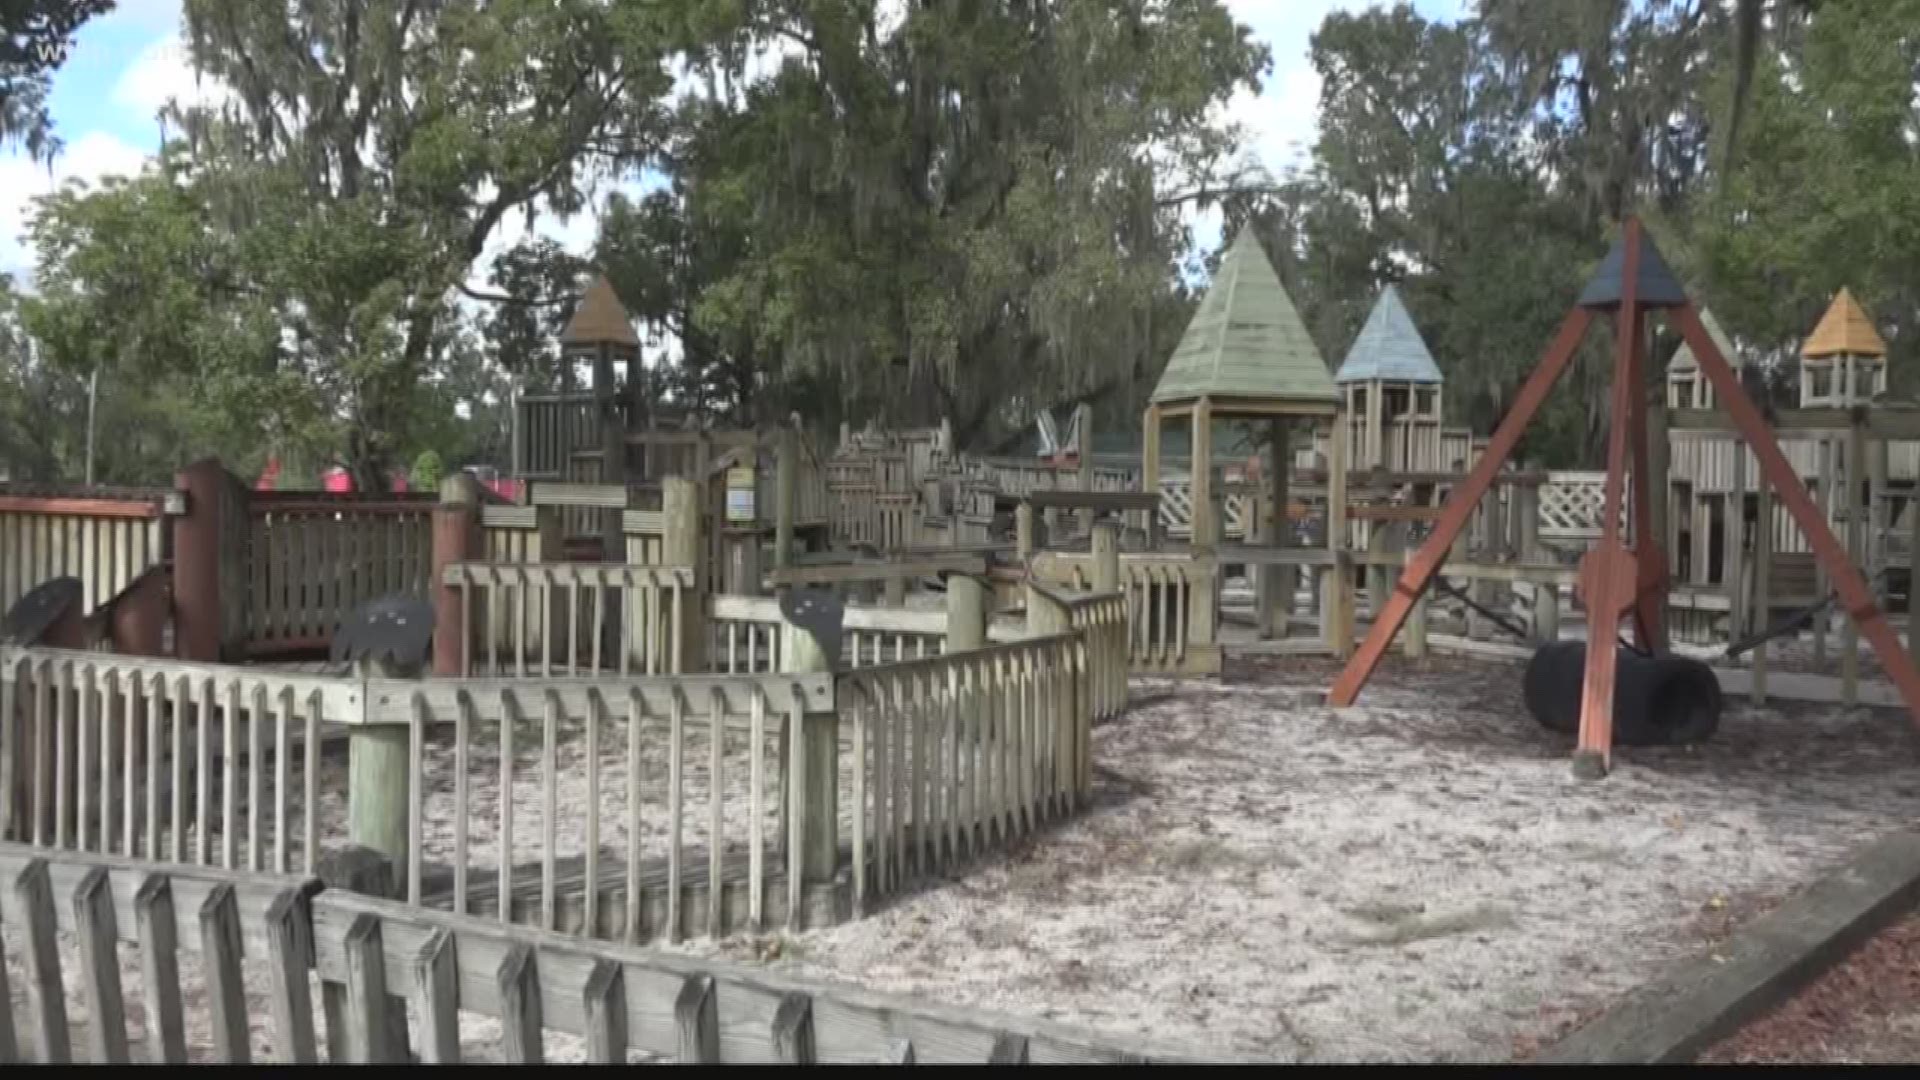 Parents love watching their kids play at the same Brooksville park they did as children, but the city plans to tear it down.